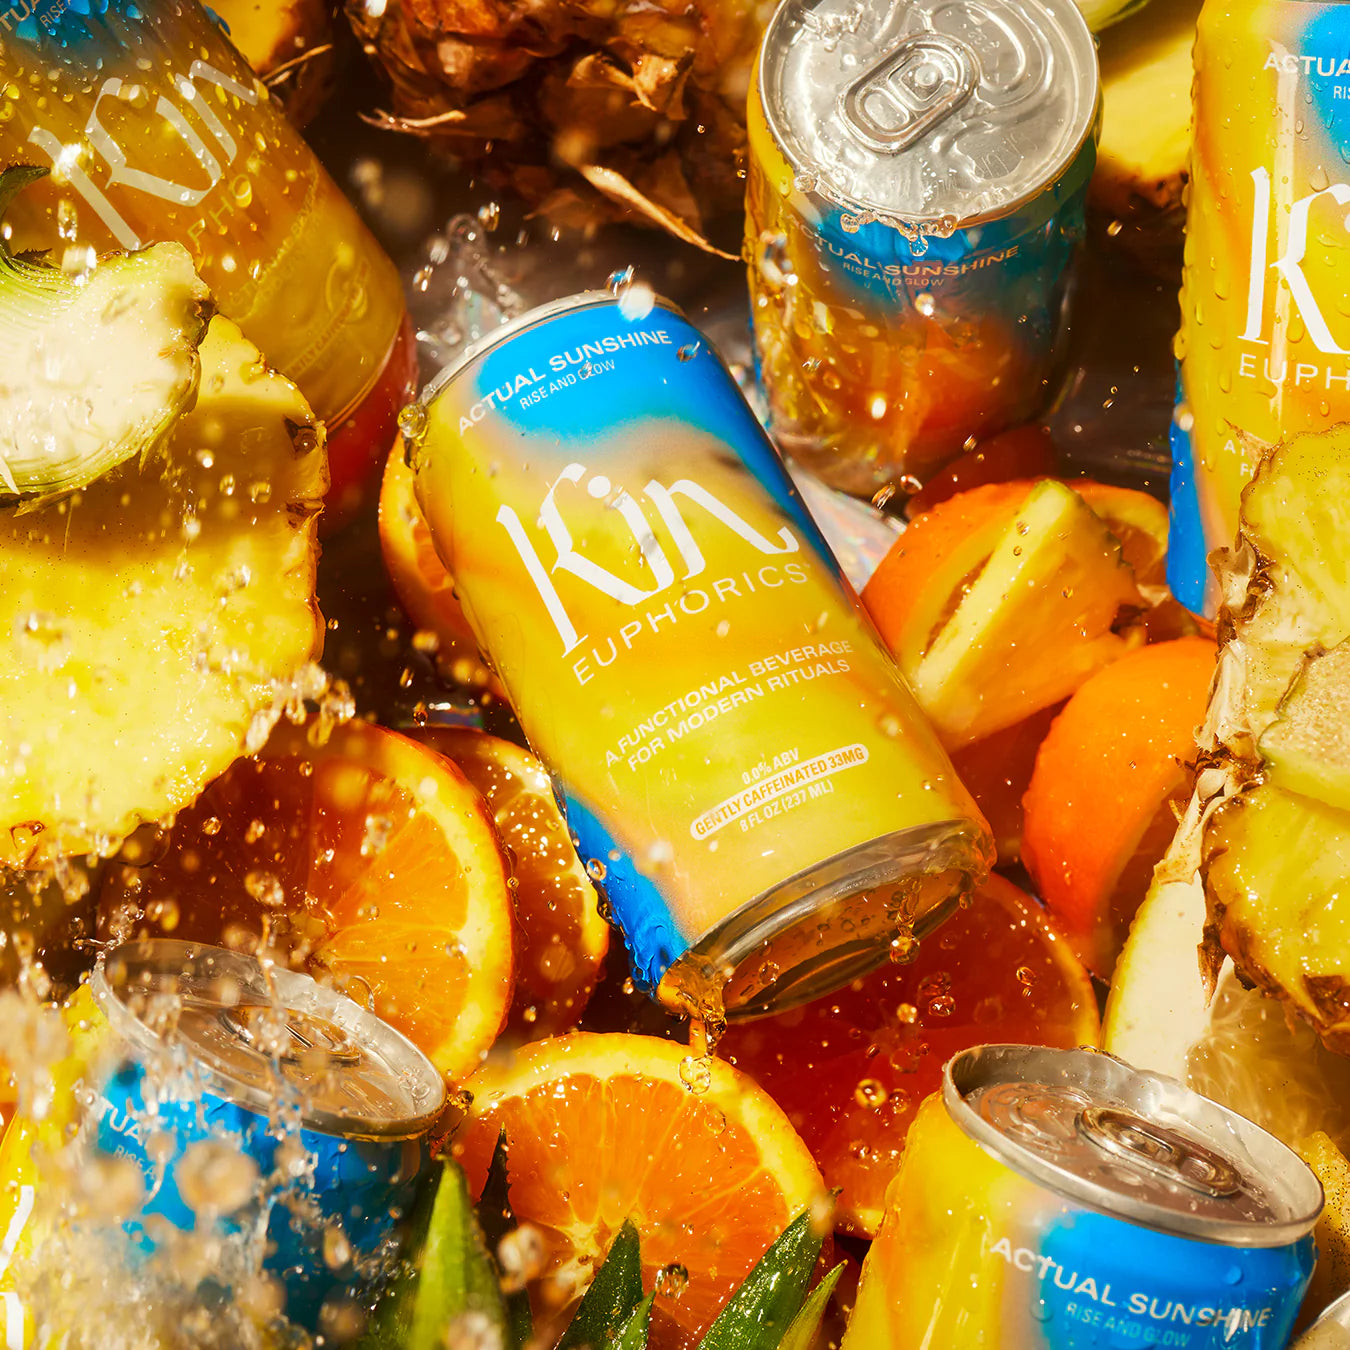 cans of get your glow being splashed in water with orange and pineapple slices